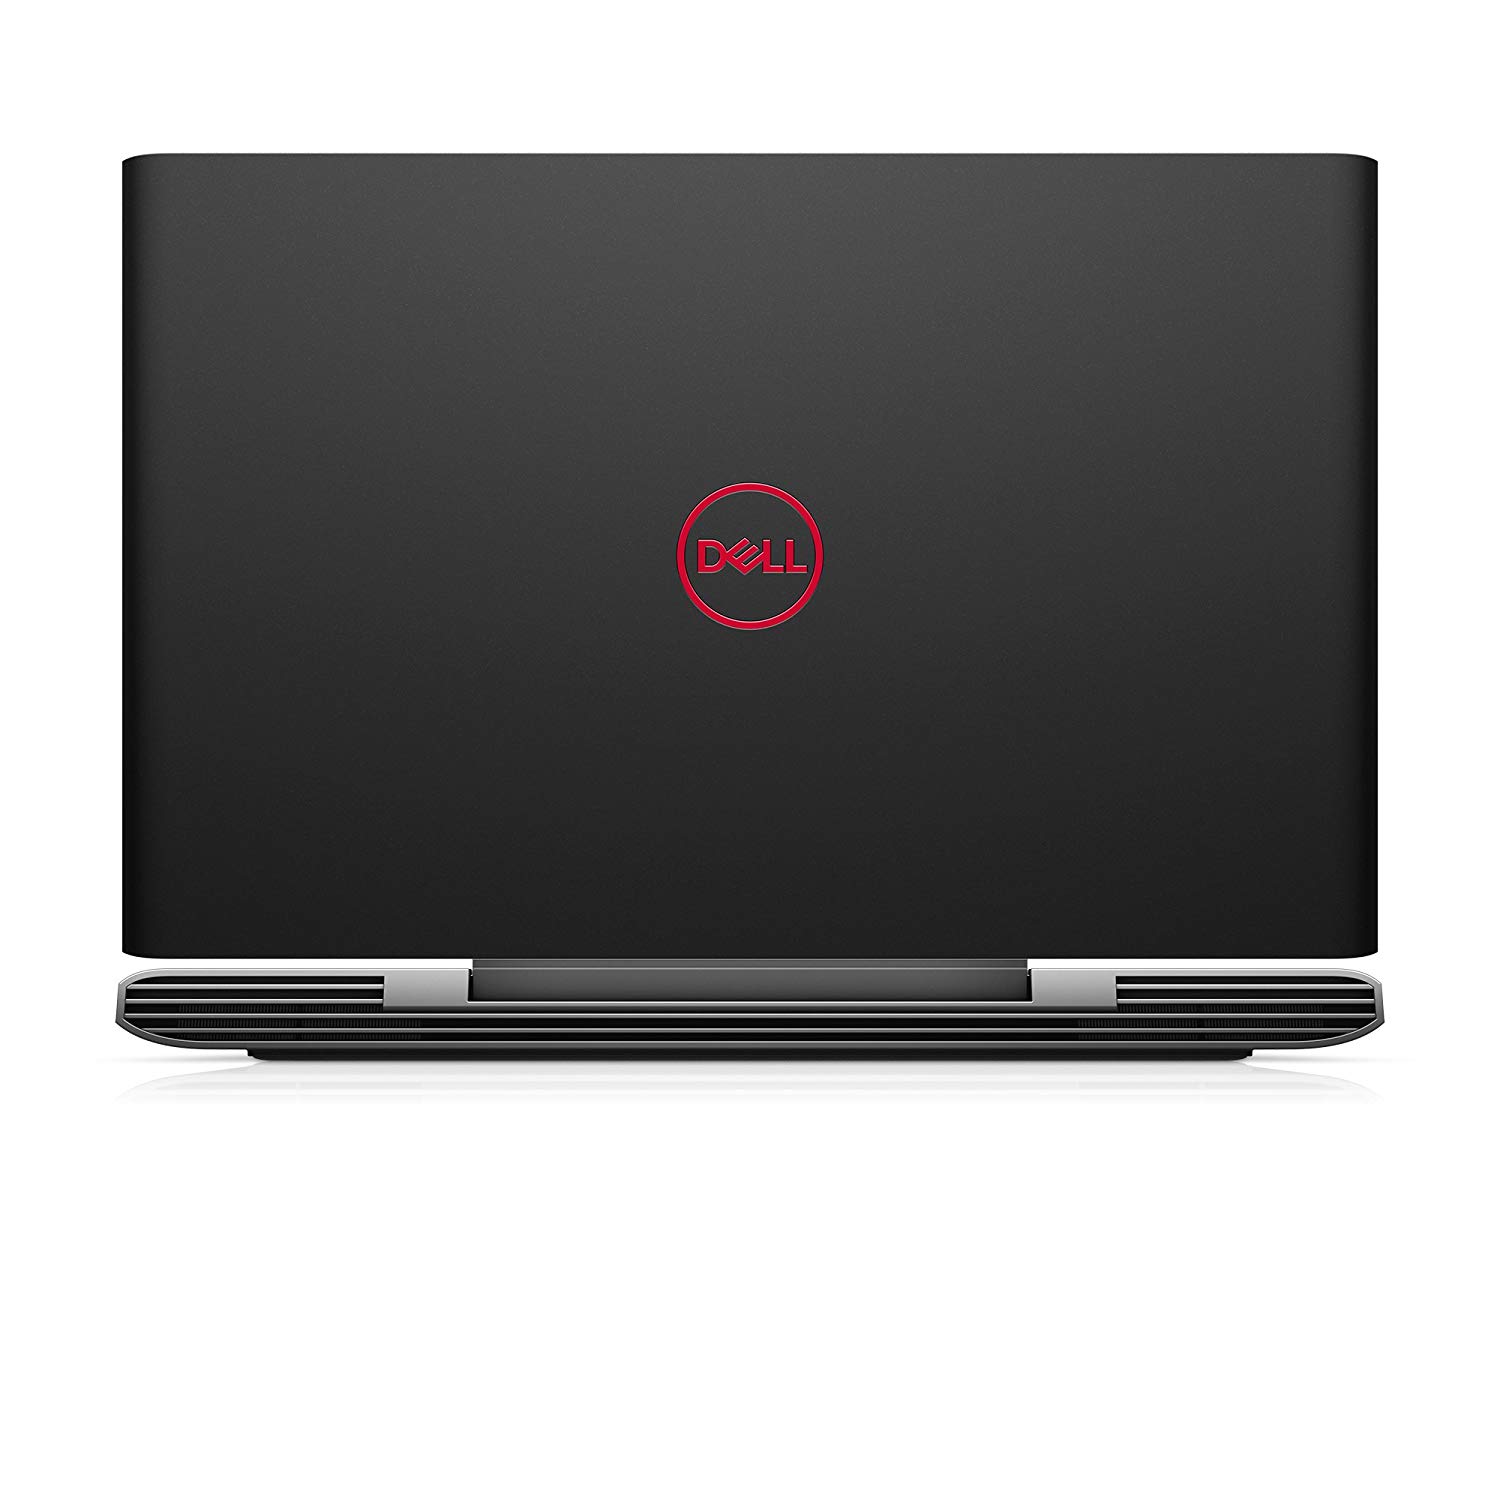 G5 Dell Gaming Laptop